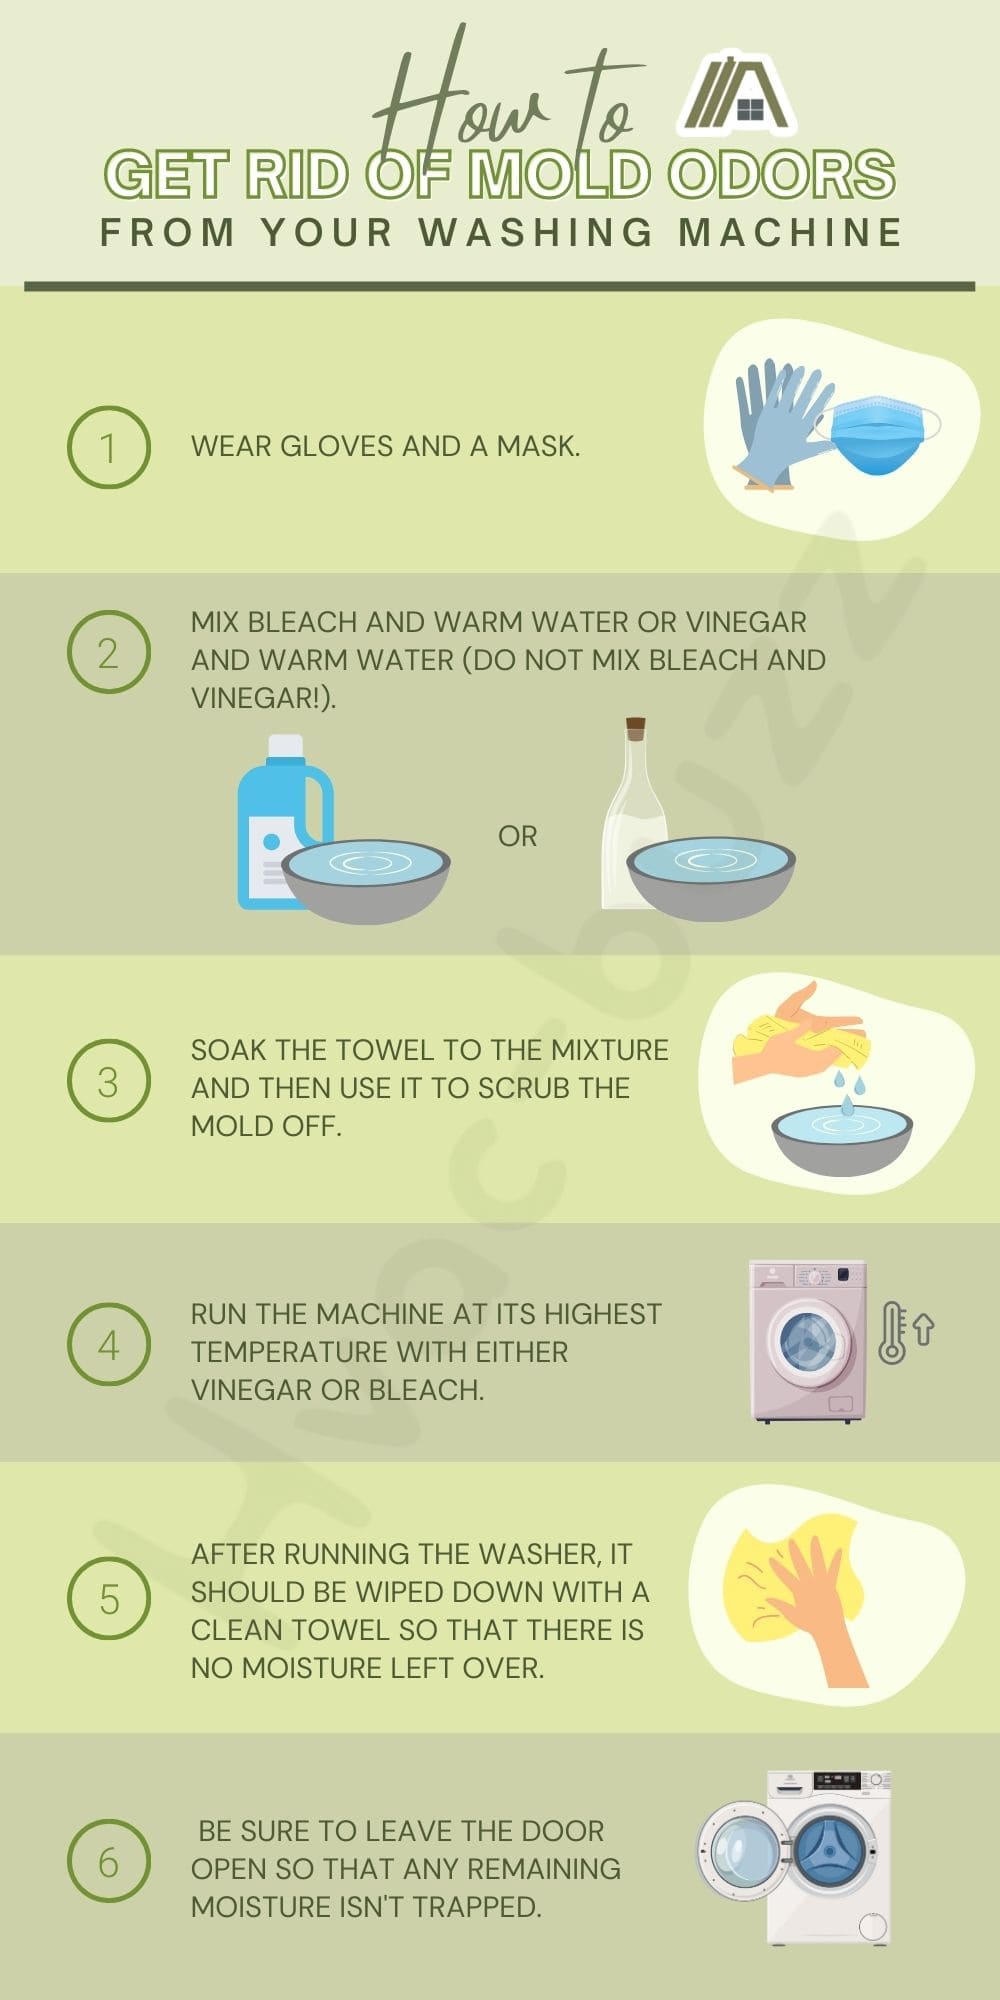 How to get rid of mold odors from your washing machine